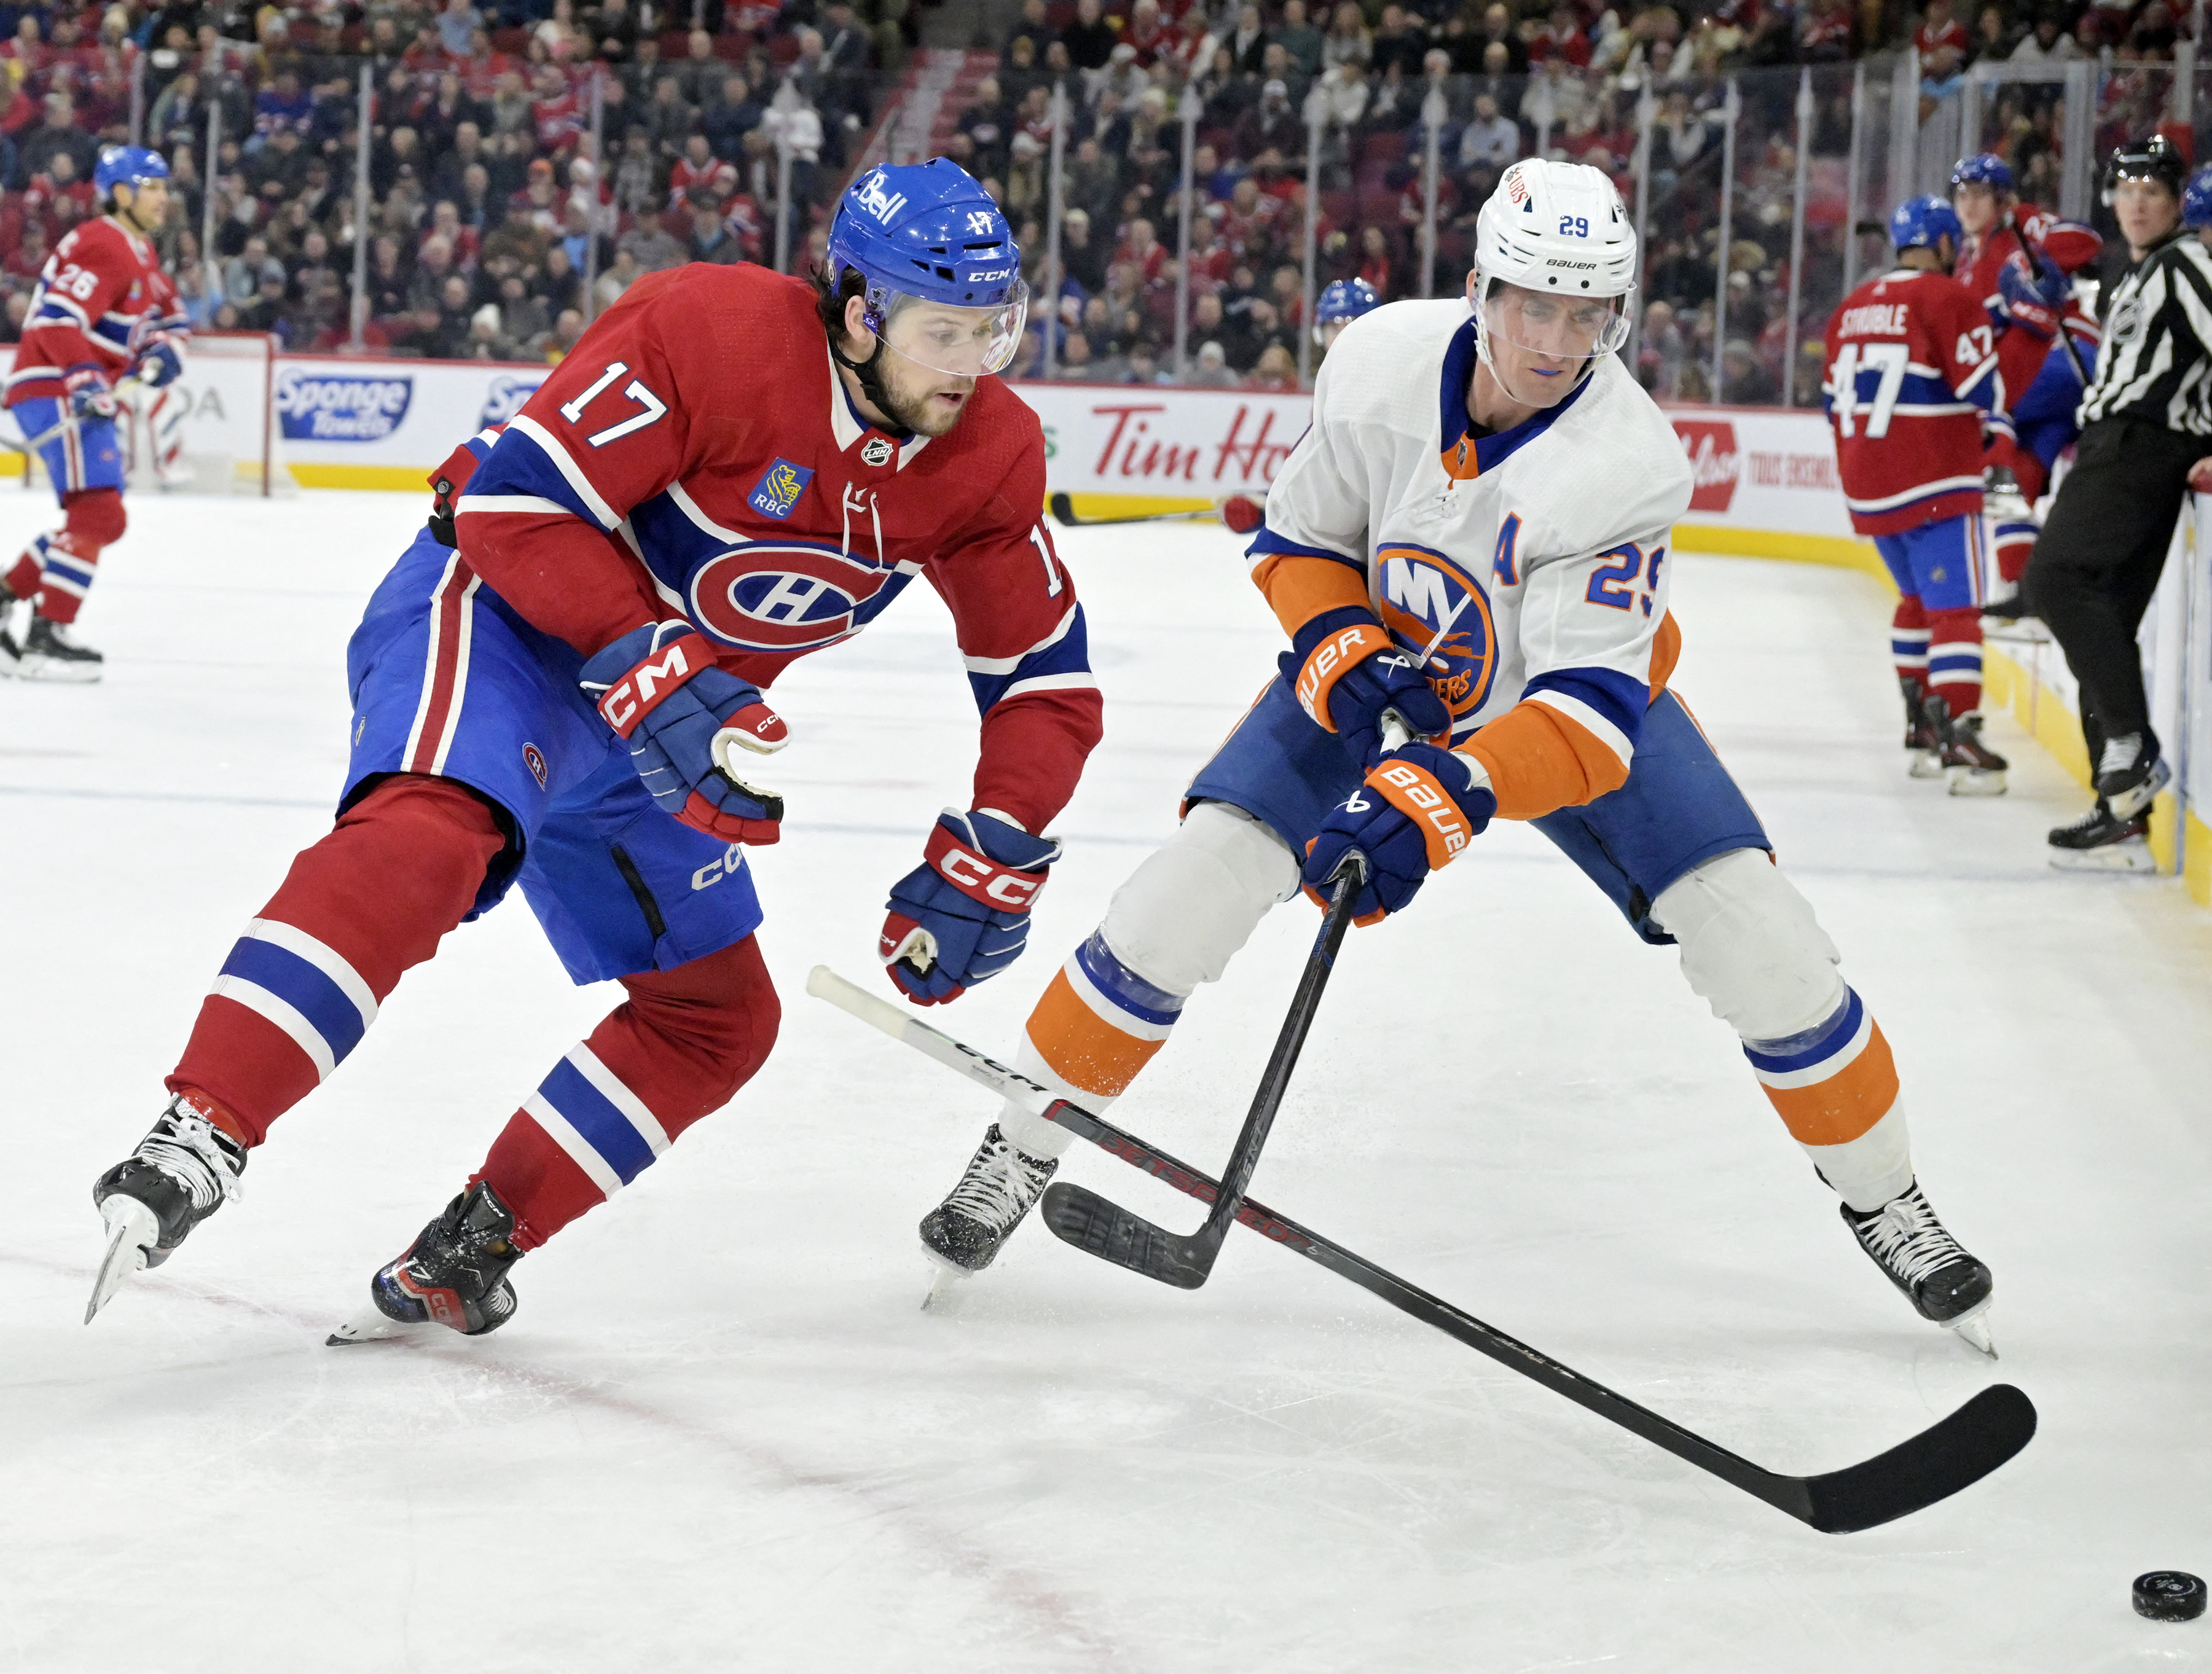 Josh Anderson scores twice lifting Montreal Canadiens to 5-3 win